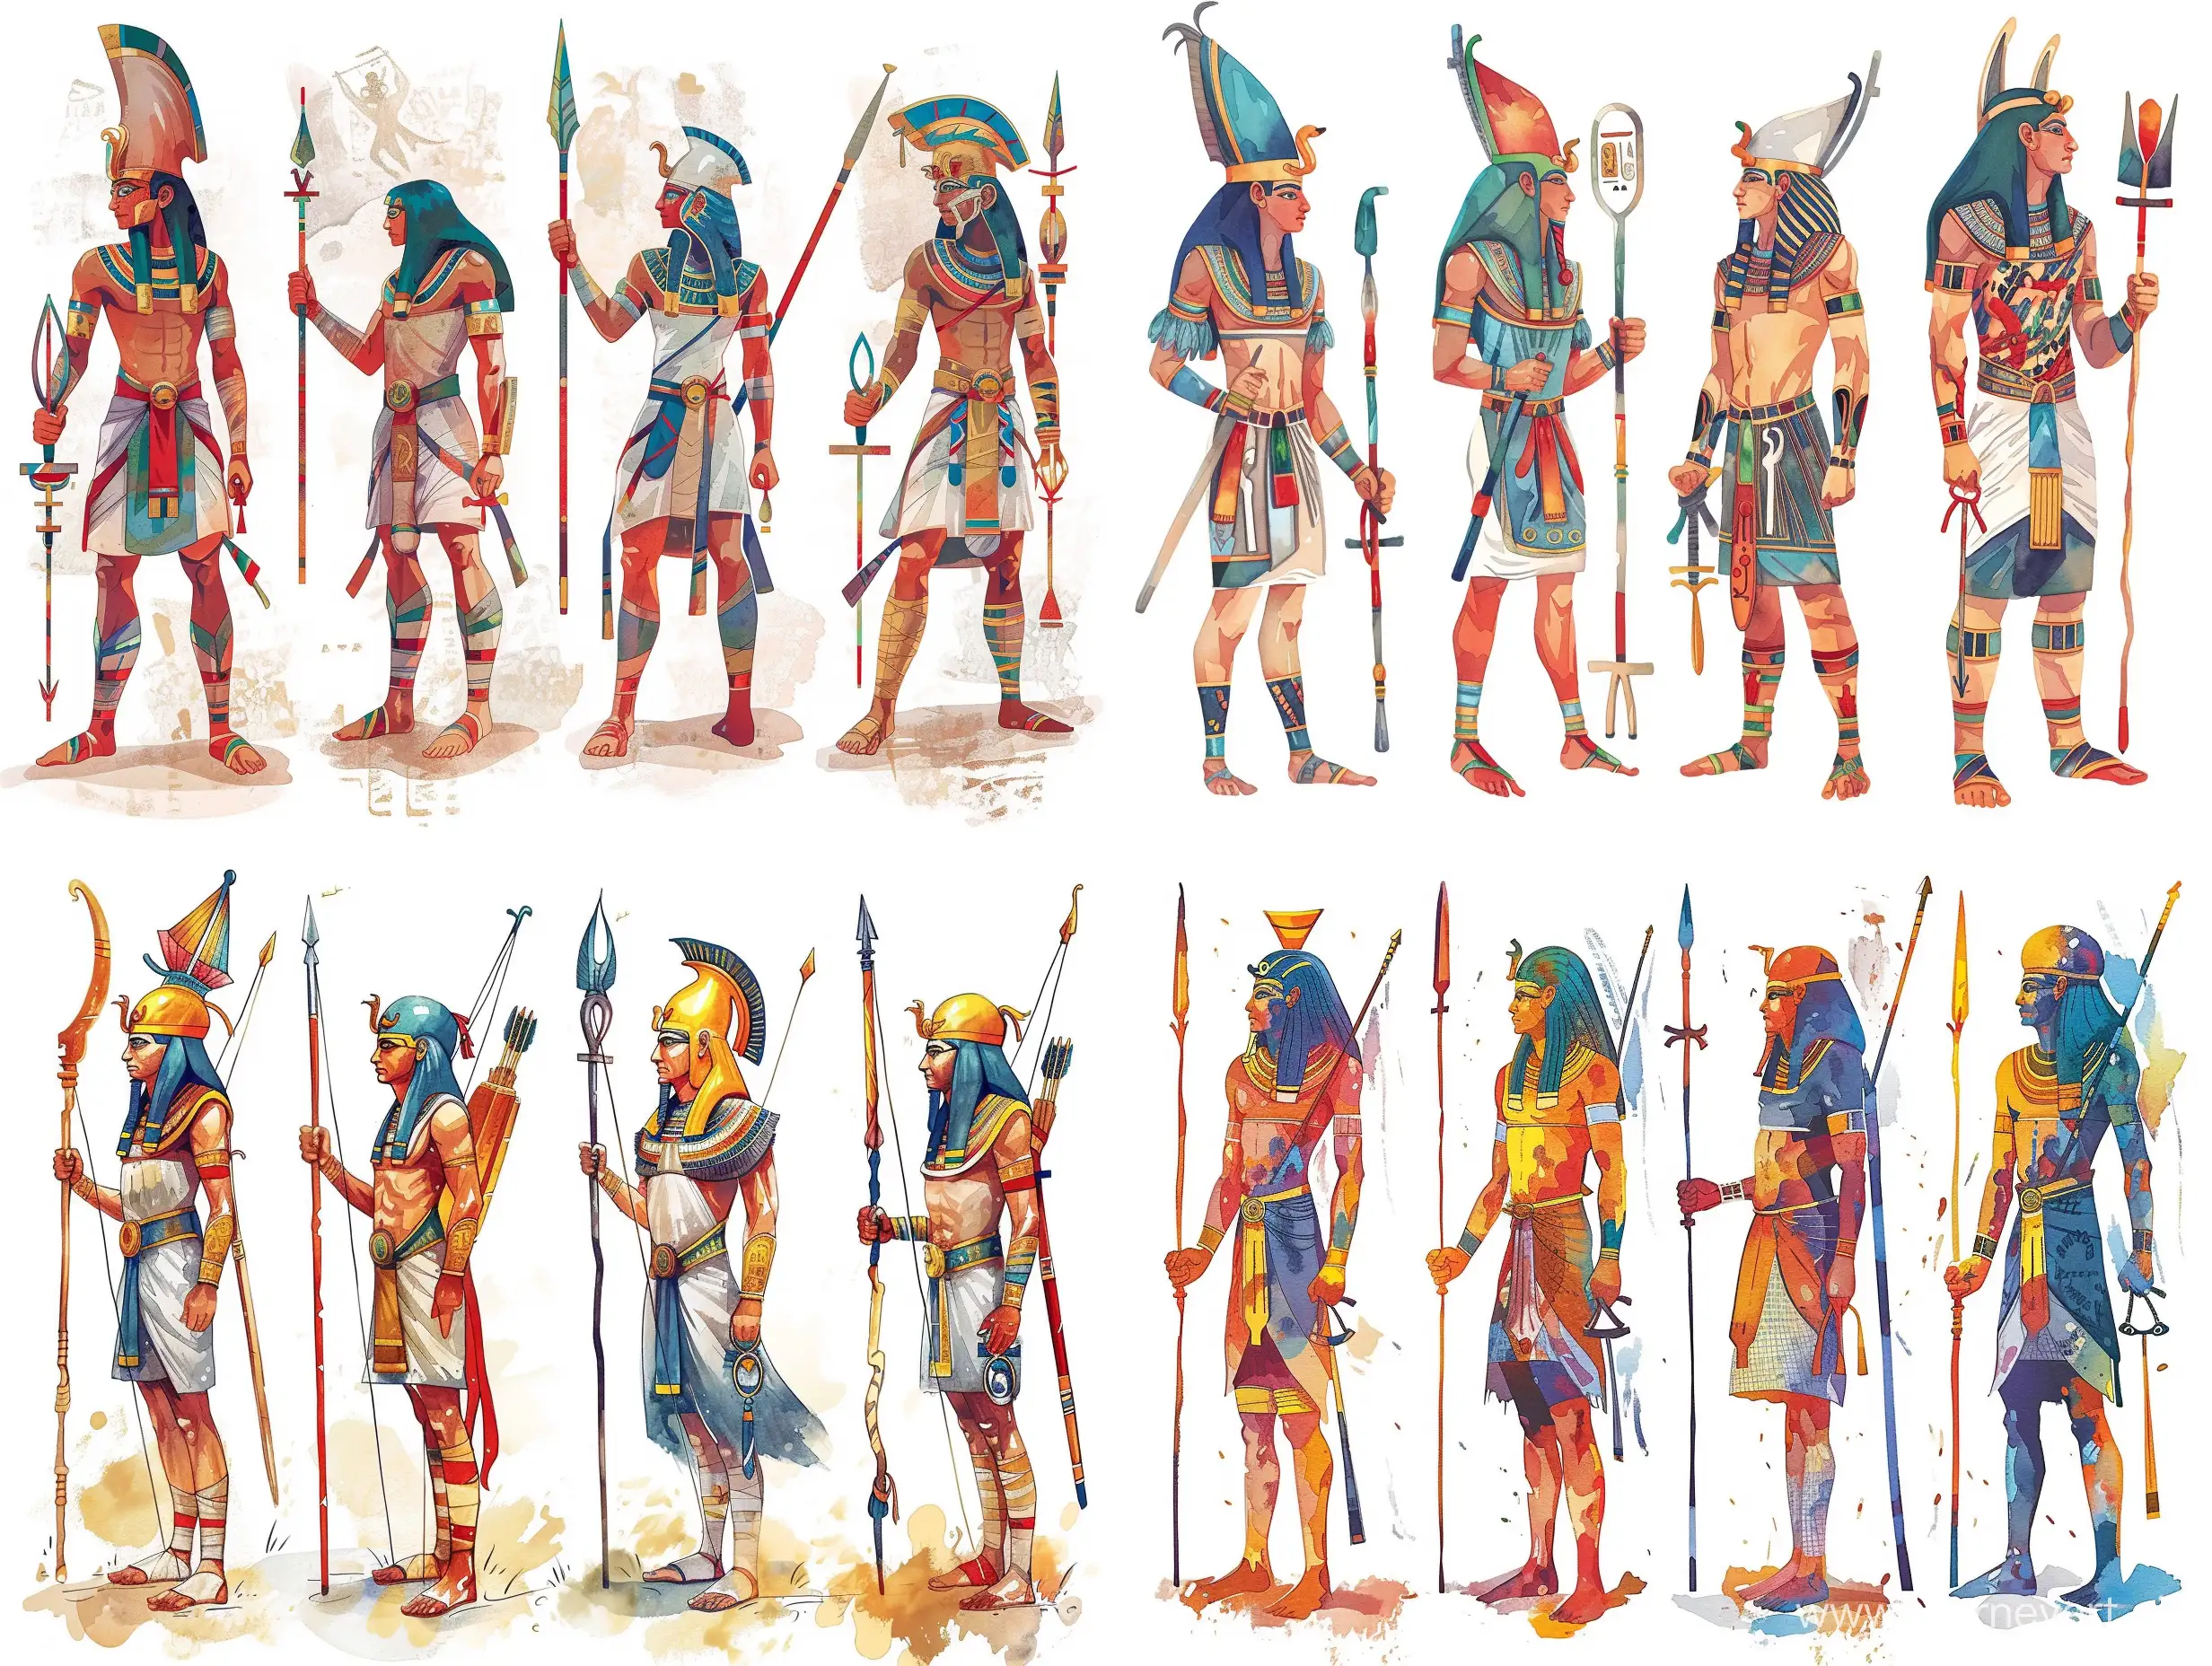 Ancient-Egyptian-Warriors-in-Six-Stylized-Caricature-Variants-by-Victor-Ngai